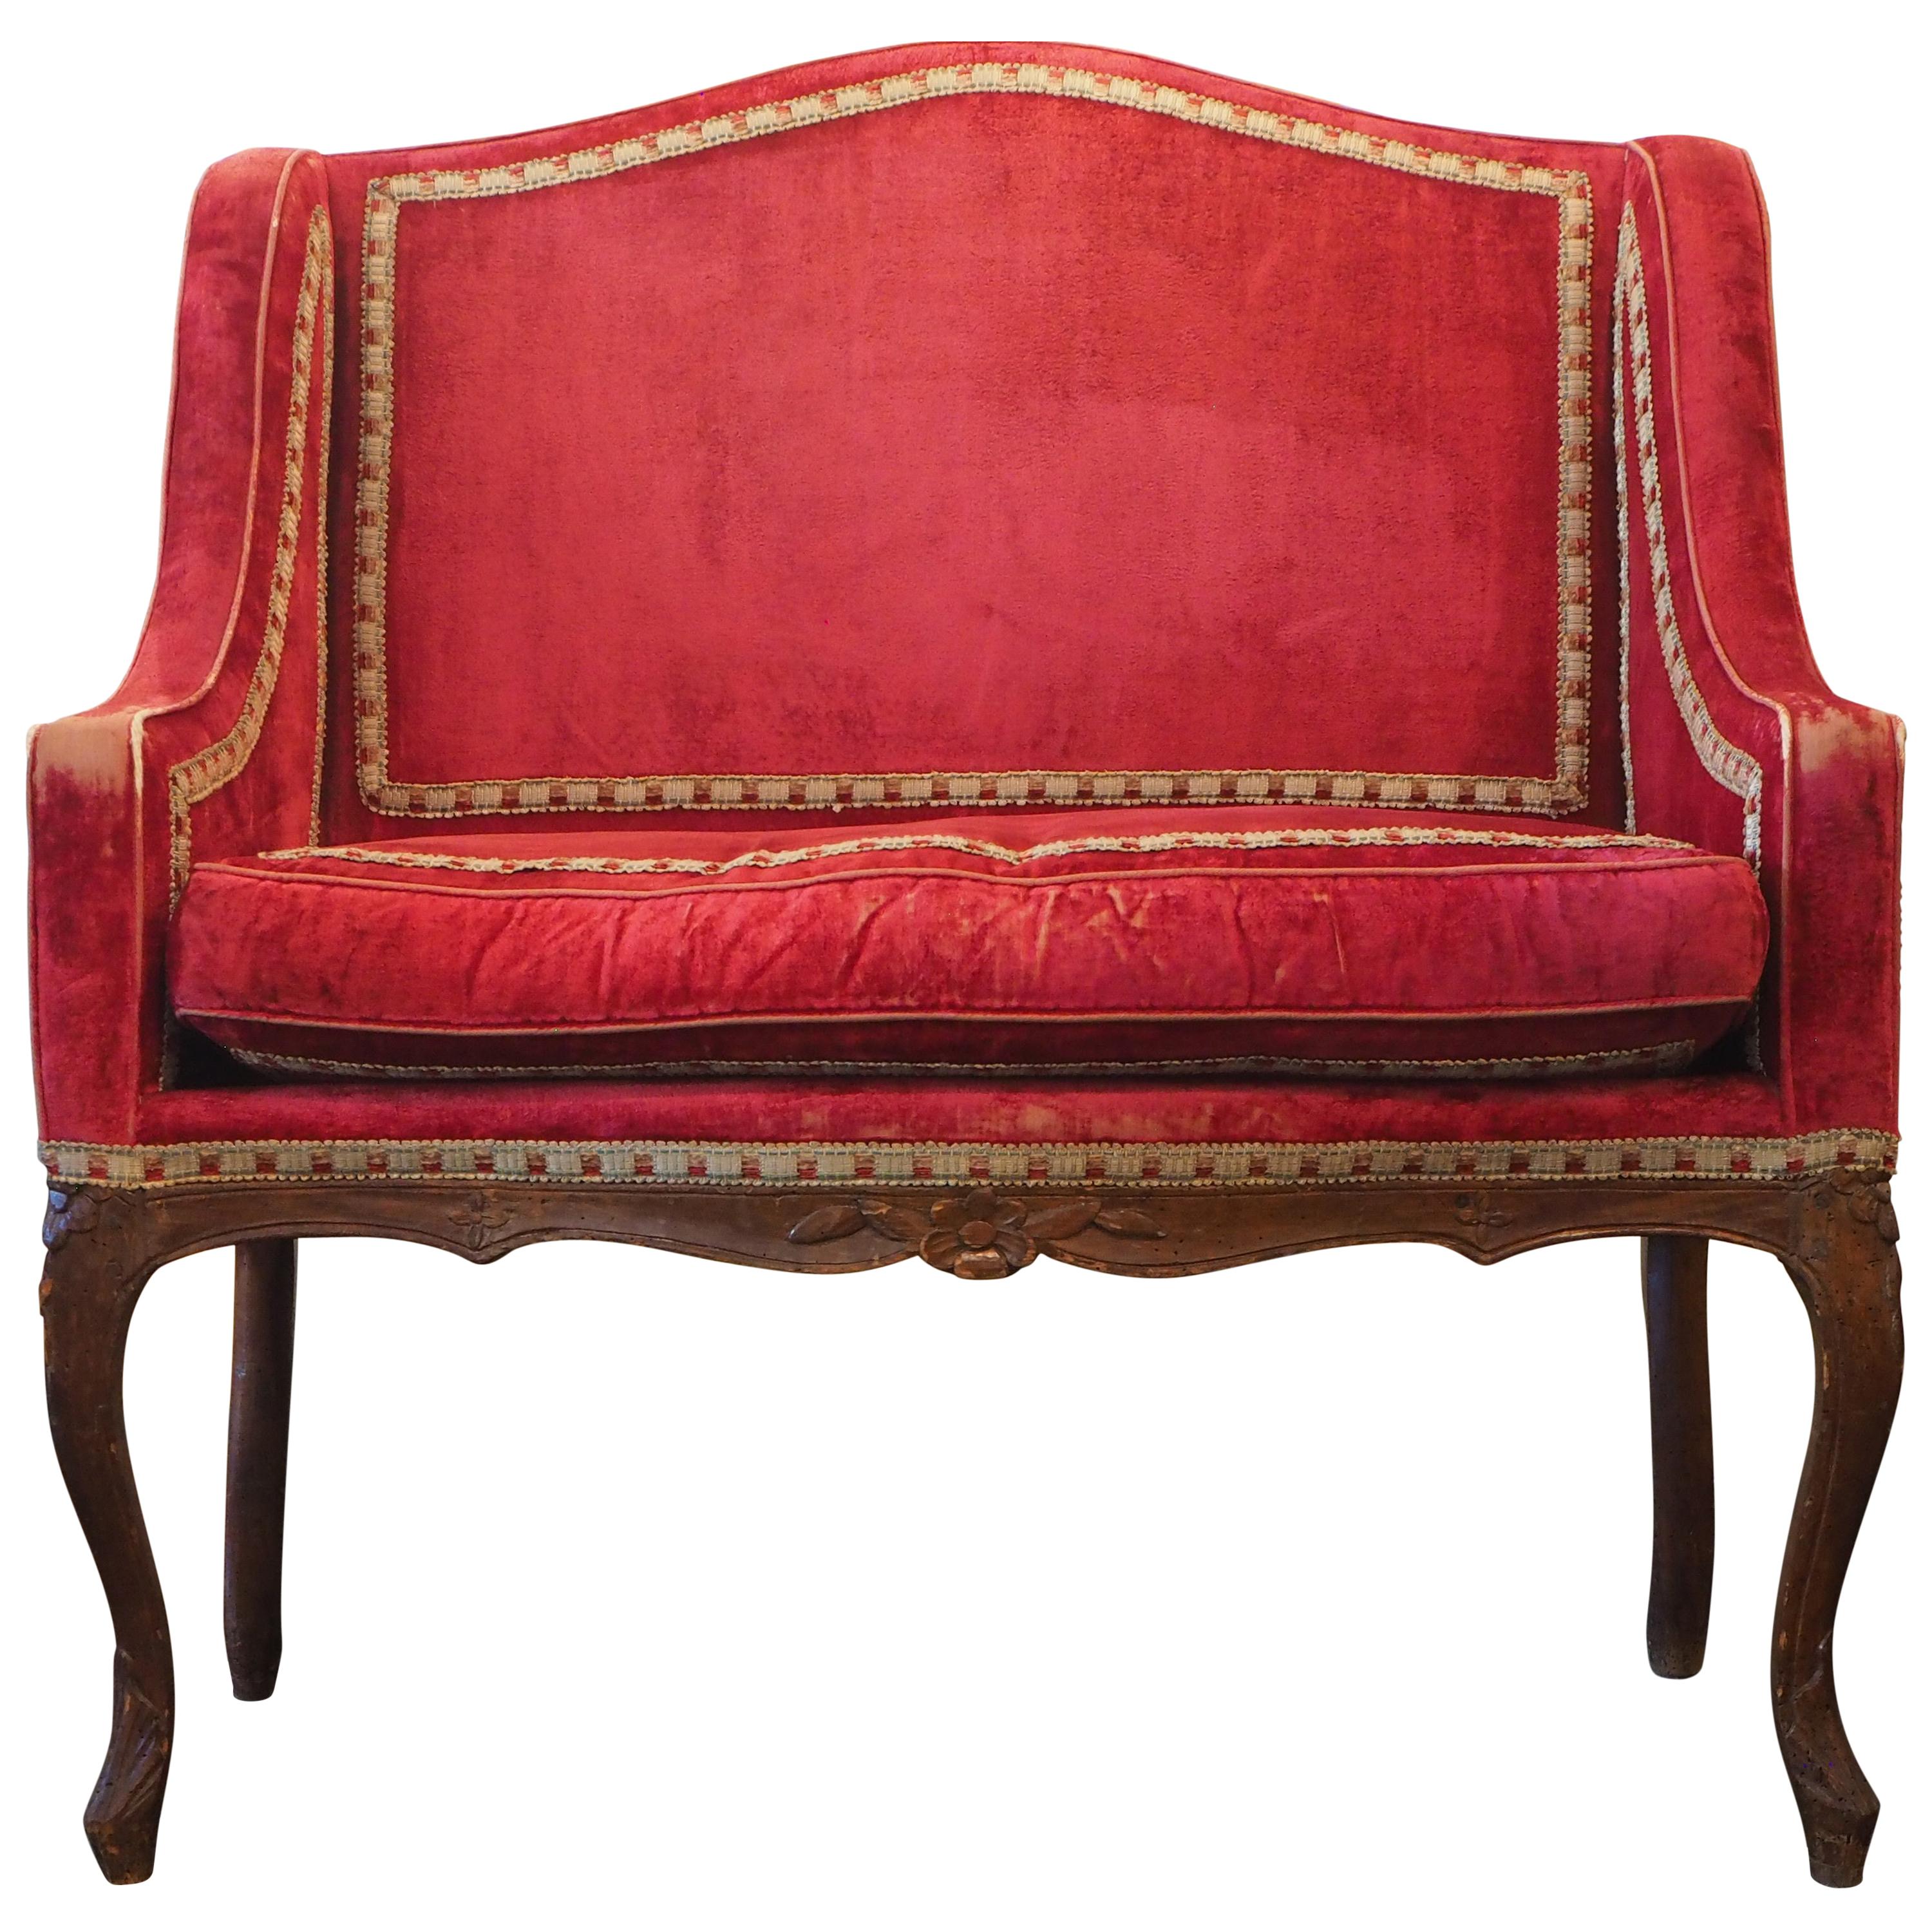 French Louis XV Style Provencal Banquette 'Narrow Settee'